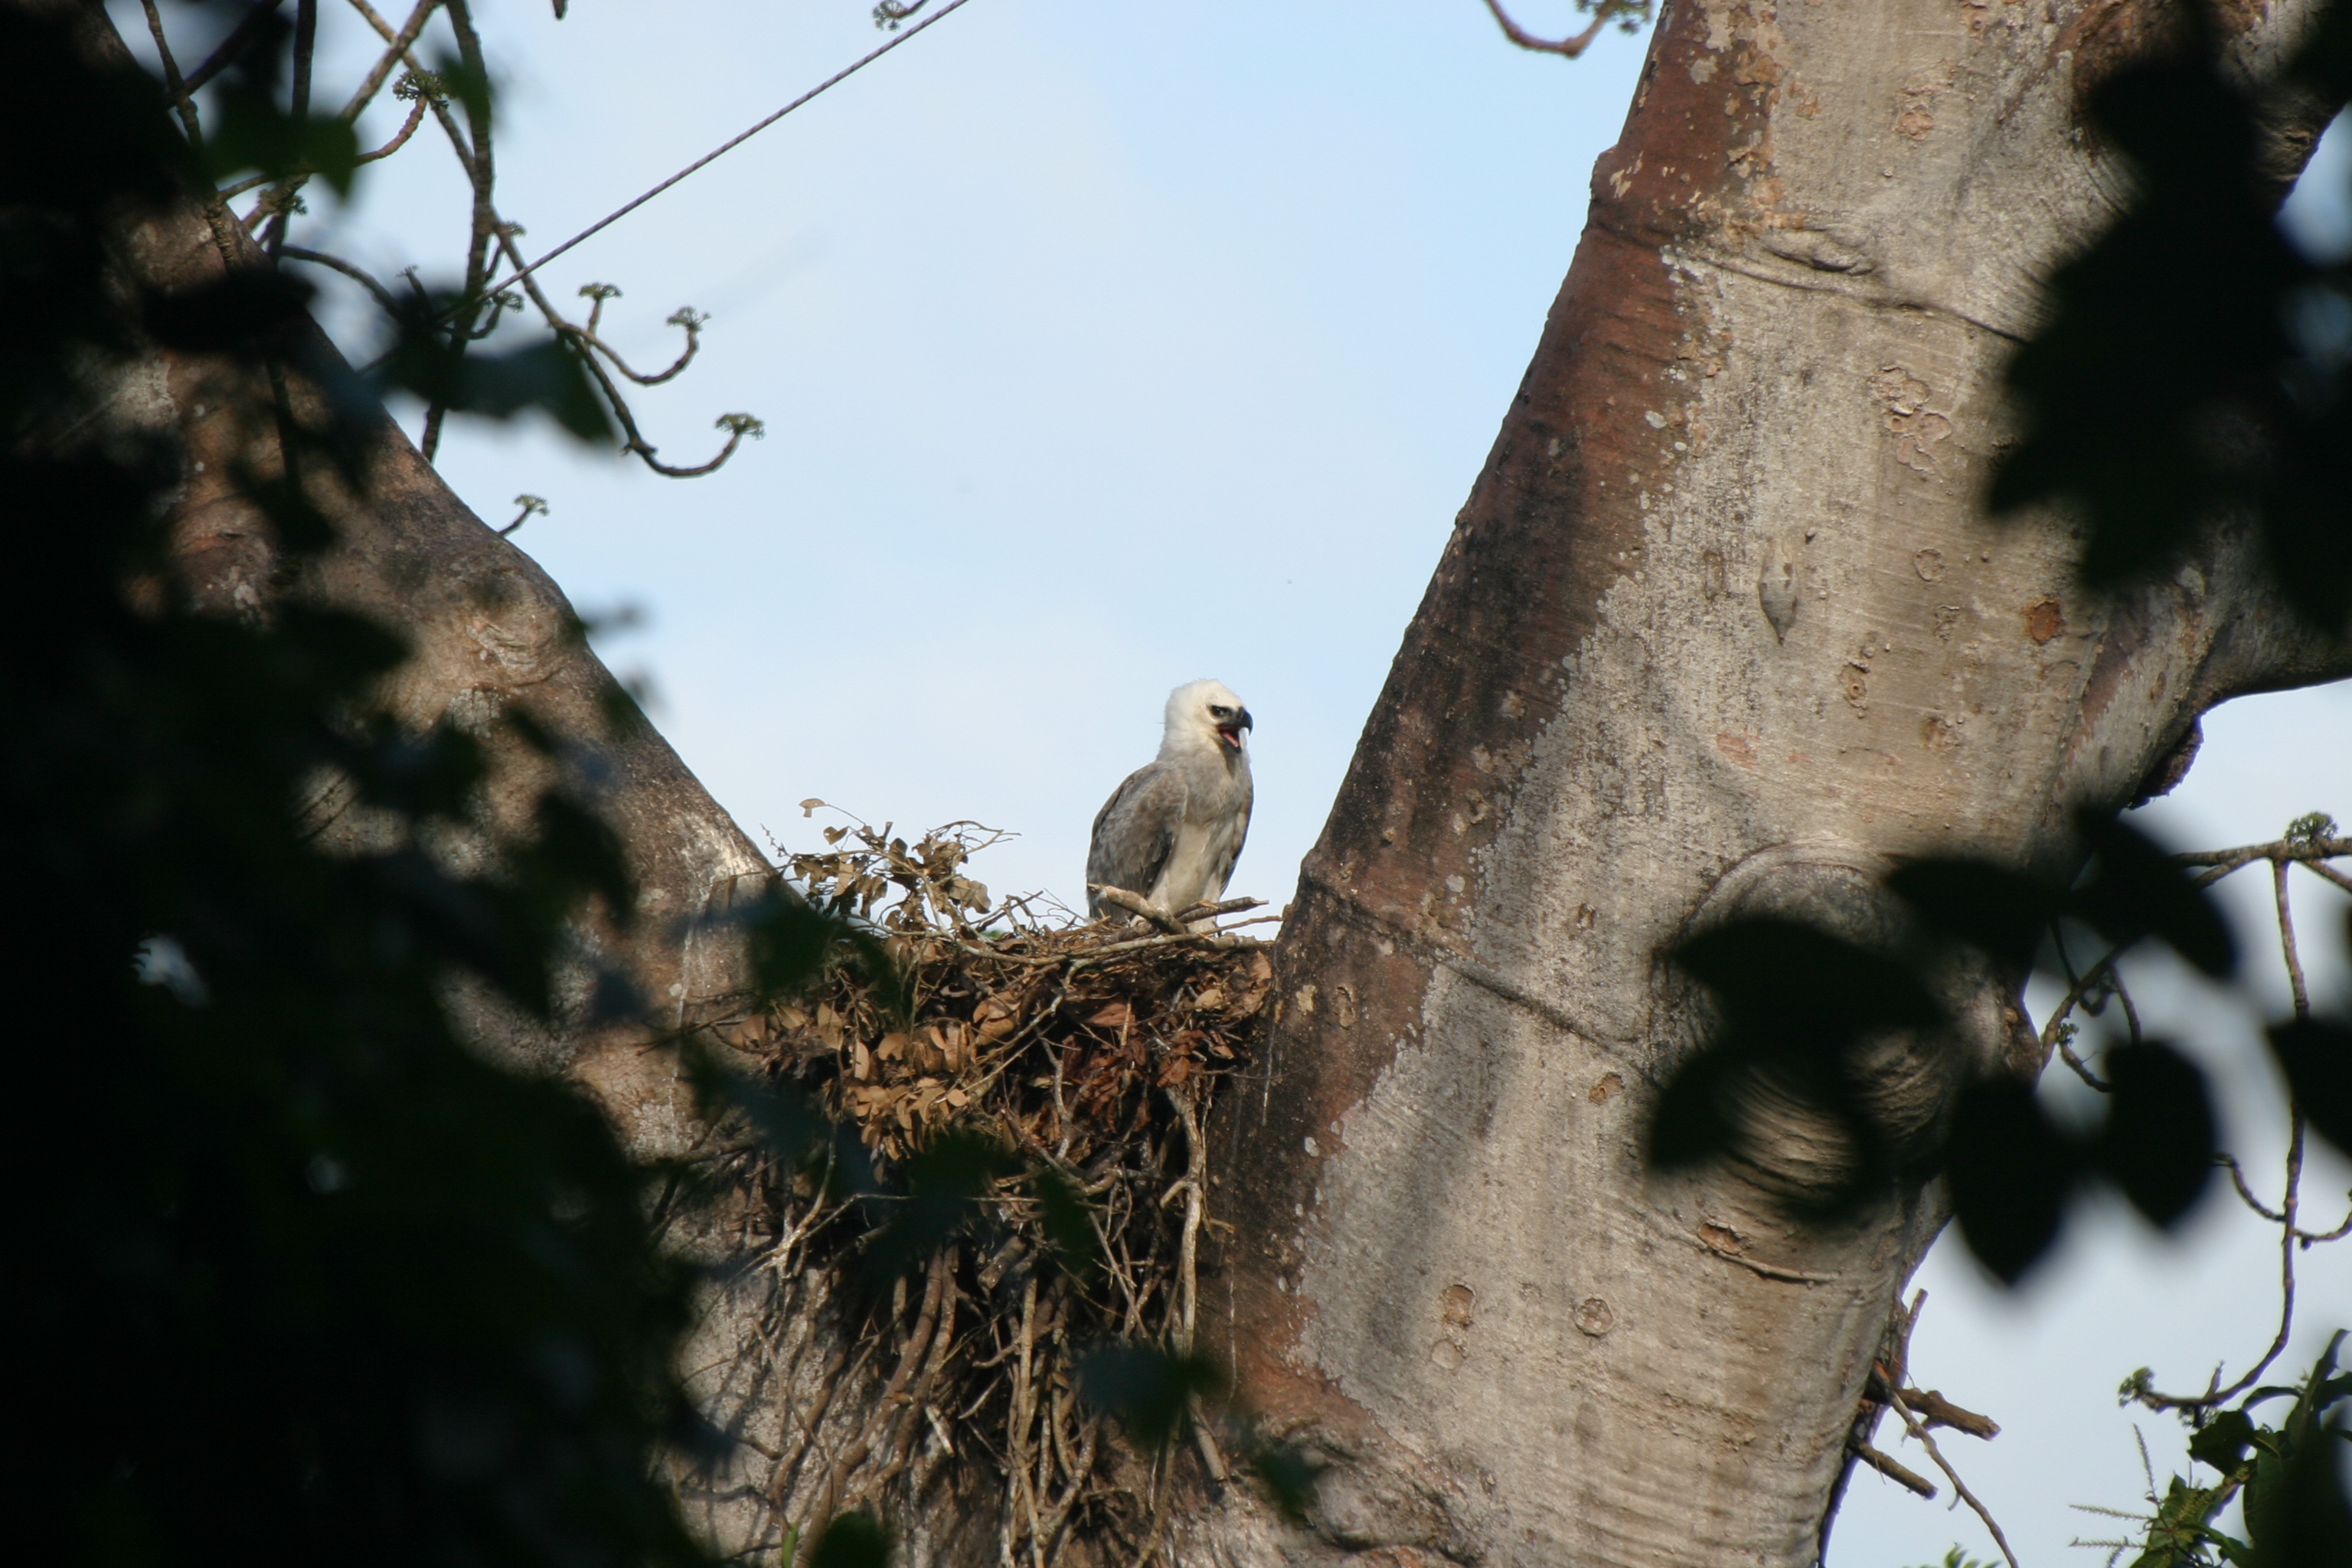 Young Harpy Eagle perched on its nest